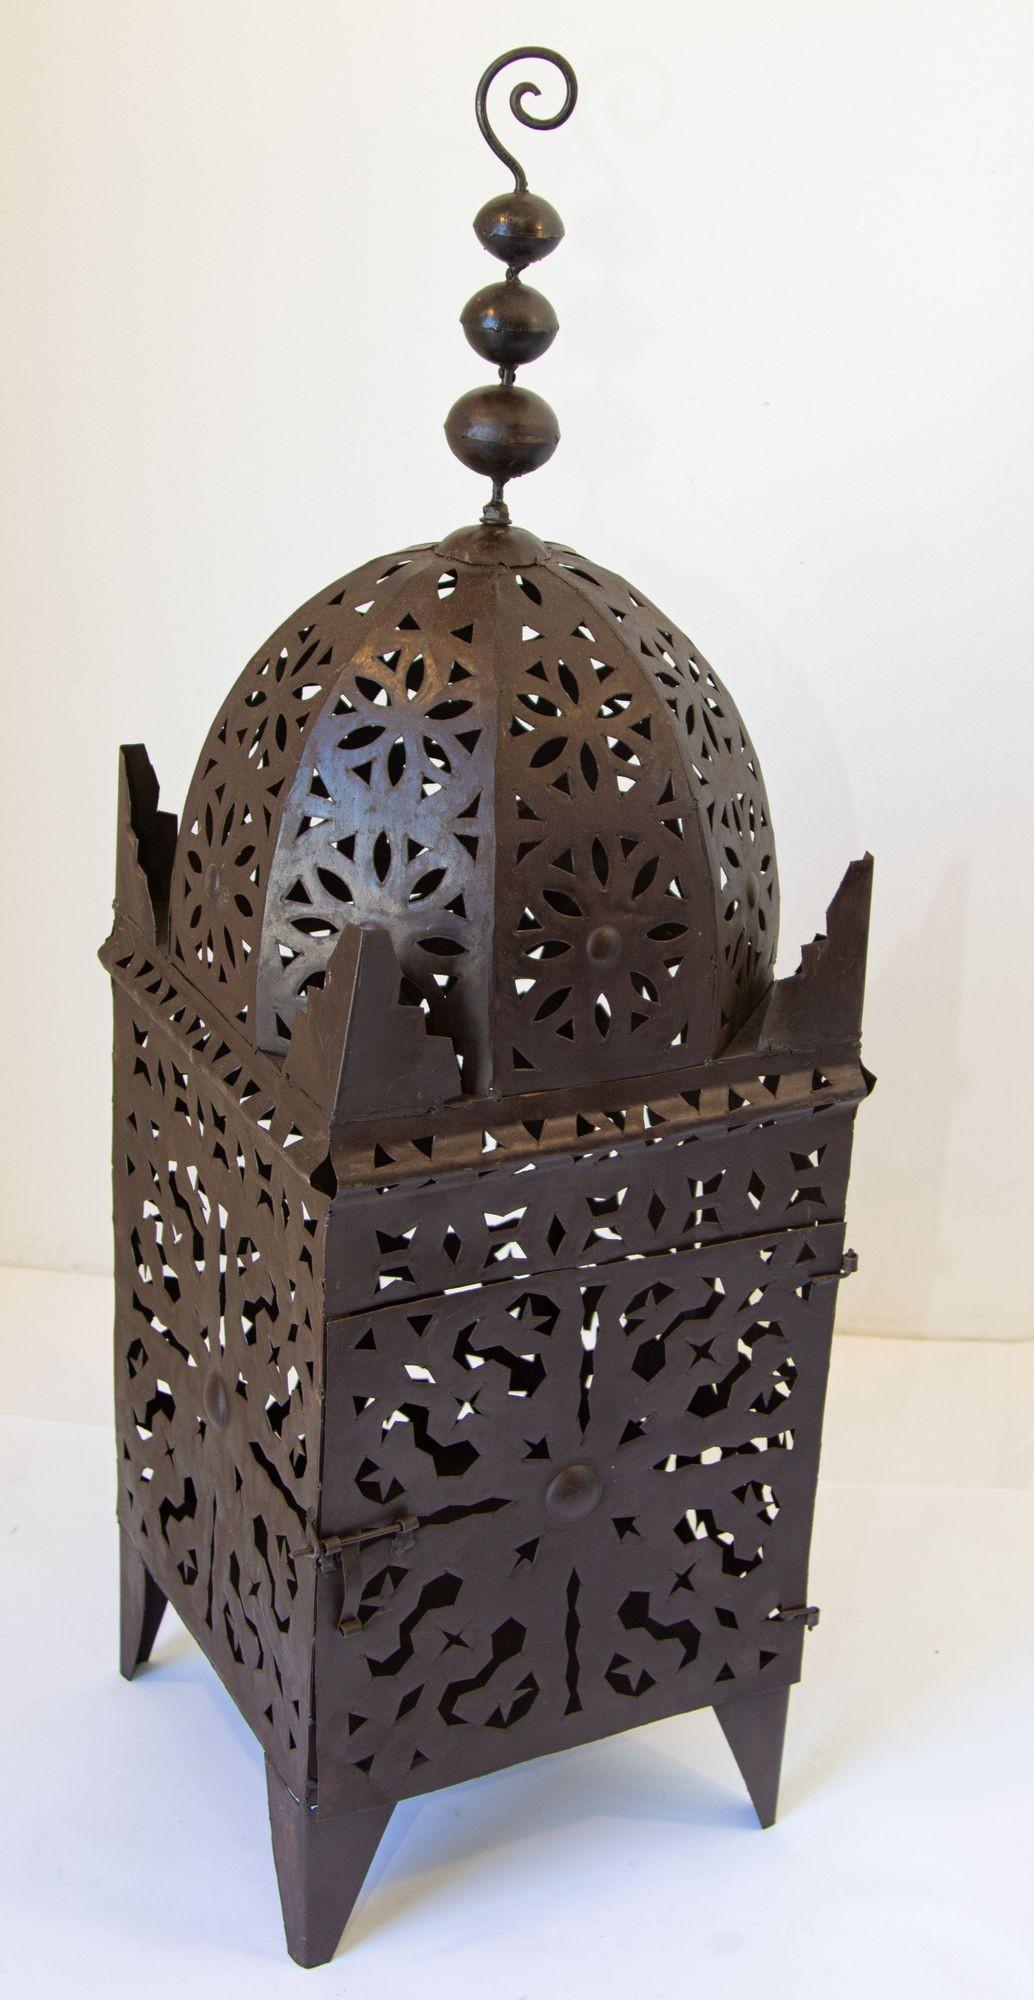 Outdoor Moroccan hurricane metal candle lantern.
Moroccan Moorish metal candle lantern.
Hurricane candle lamp handcrafted in Morocco by artisans, metal hand-cut openwork and hammered with Moorish designs, open in front for use with pillar